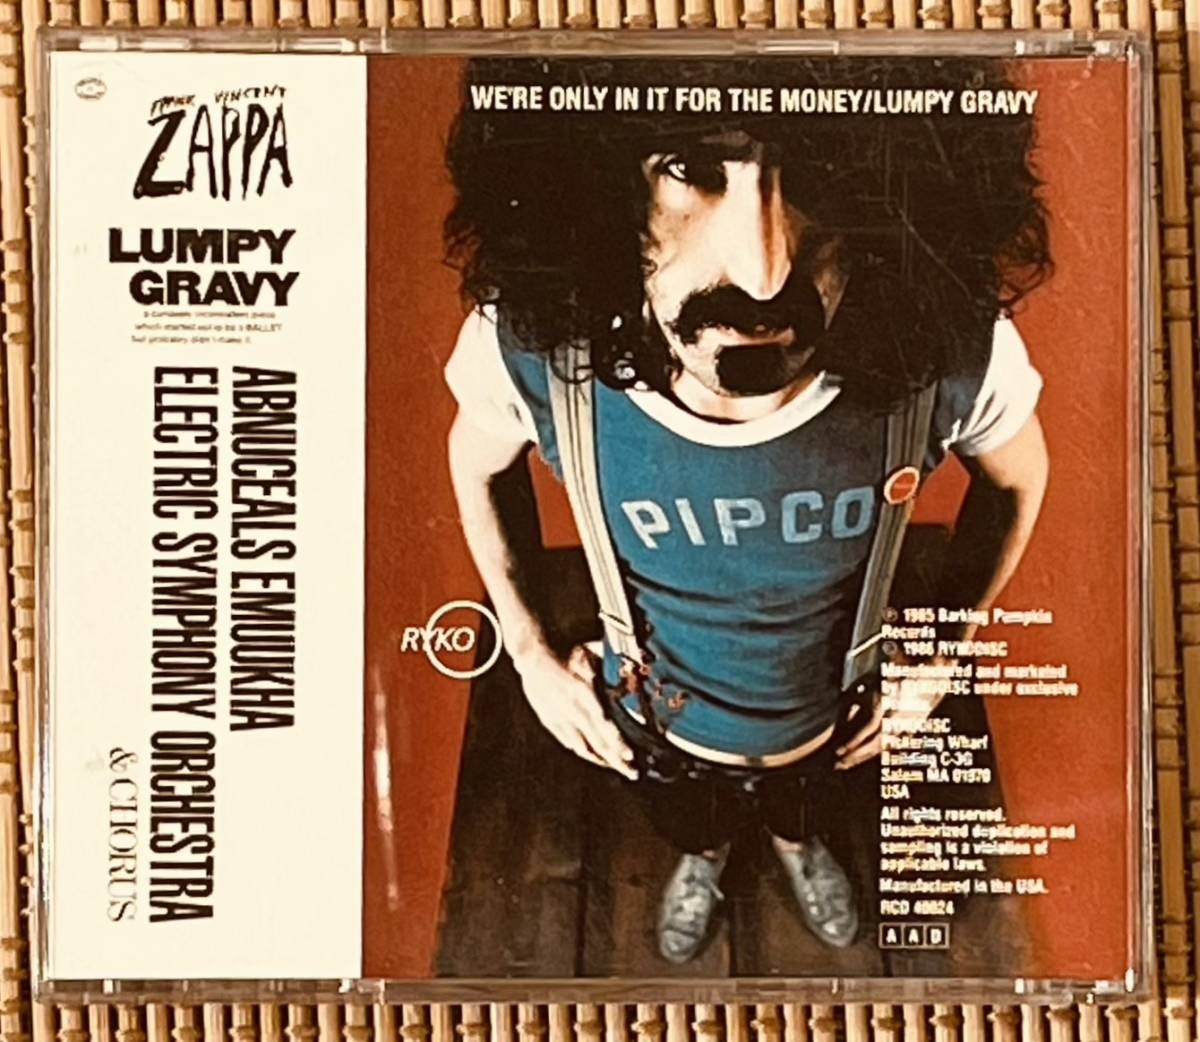 FRANK ZAPPA 即決送料無料、WE'RE ONLY IN IT FOR THE MONEY/LUMPY GRAVY、２Album1DISK、1965-66年、海外盤RCD40024